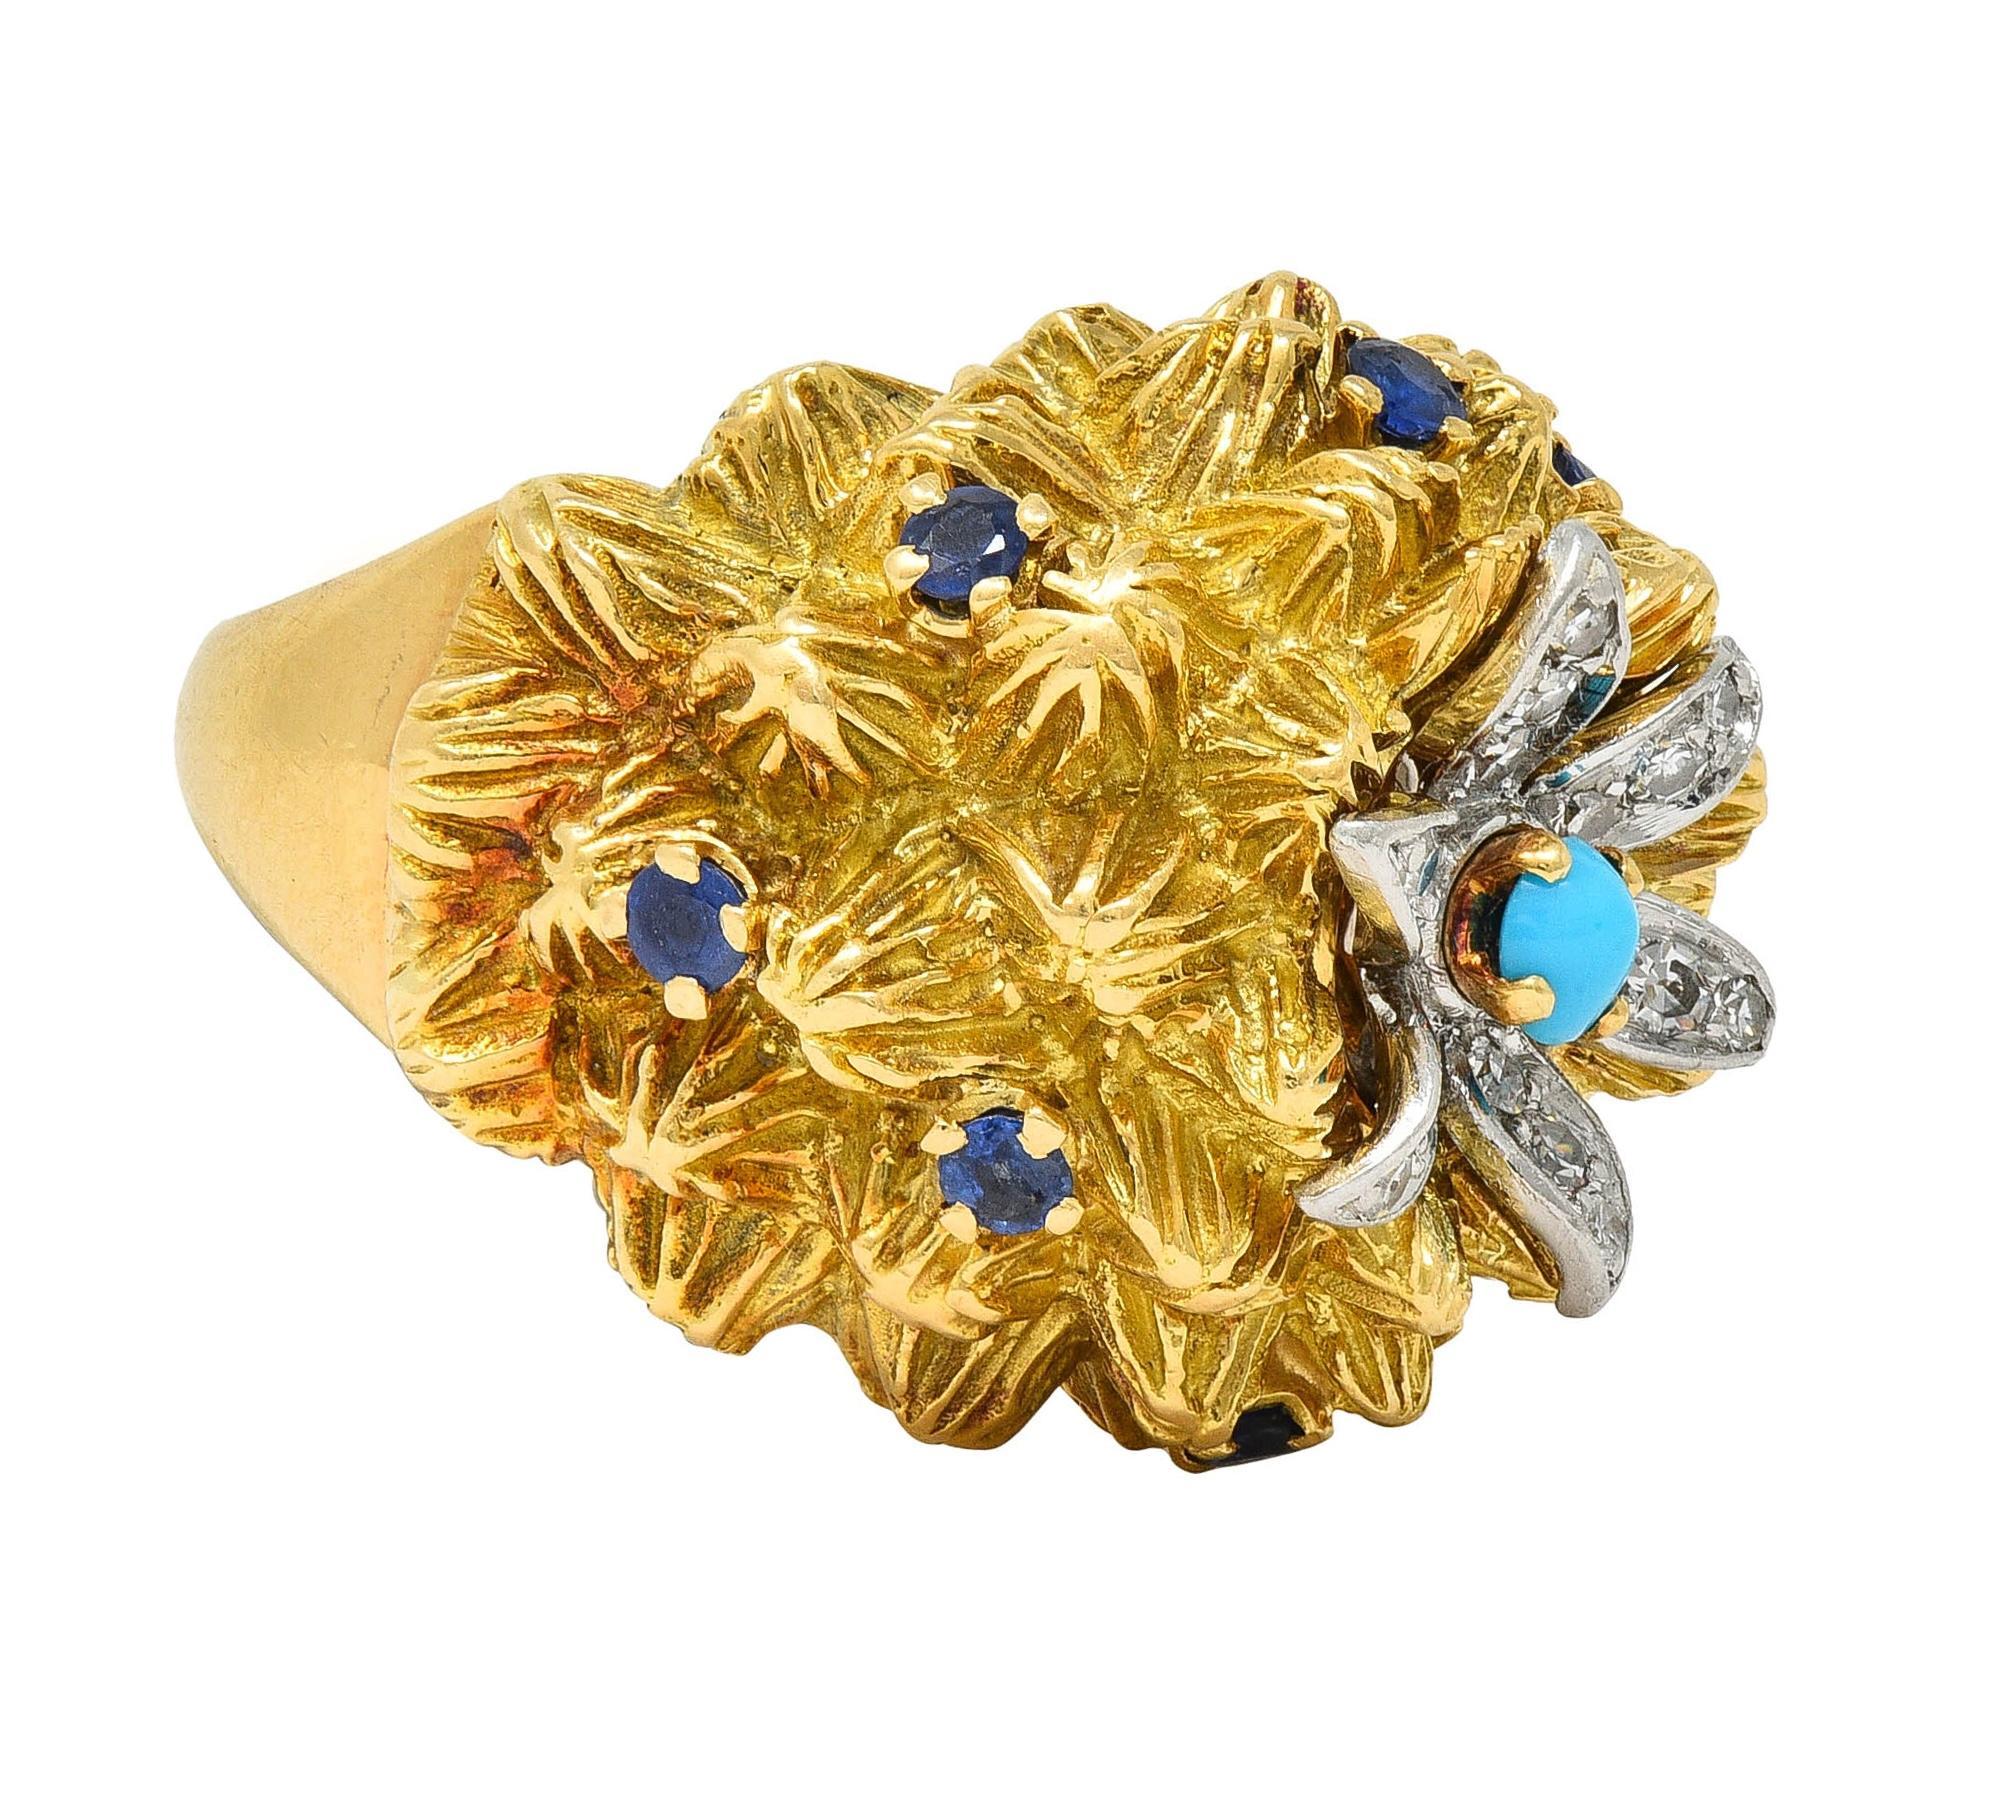 Designed as a domed form rendered as a stylized gold cactus centering a platinum flower 
With organically textured spiked gold surface accented by prong set sapphires 
Prong set throughout and weighing approximately 0.48 carat total - transparent